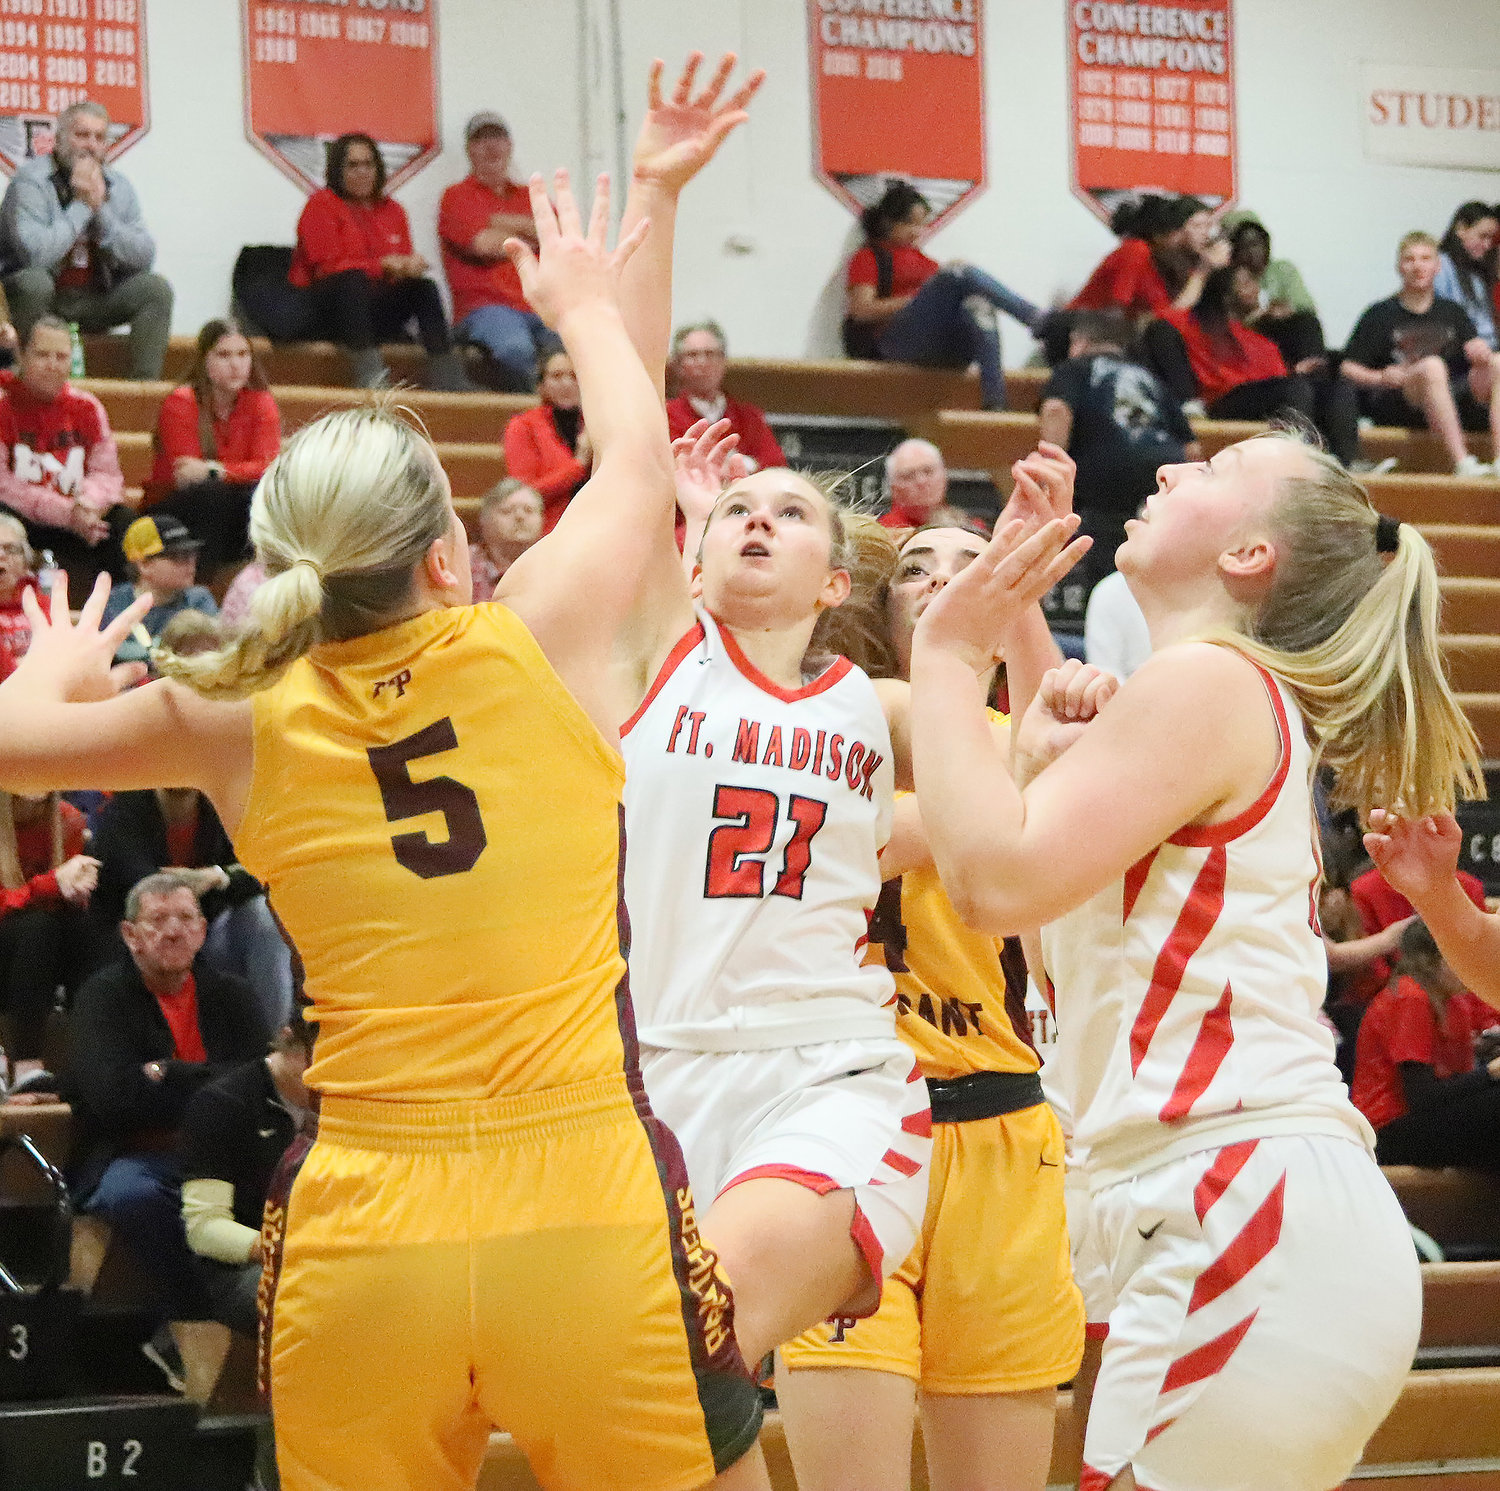 Senior Camille Kruse drives the lane for one of her 12 points on the night as Fort Madison moves to 3-0 on the year.